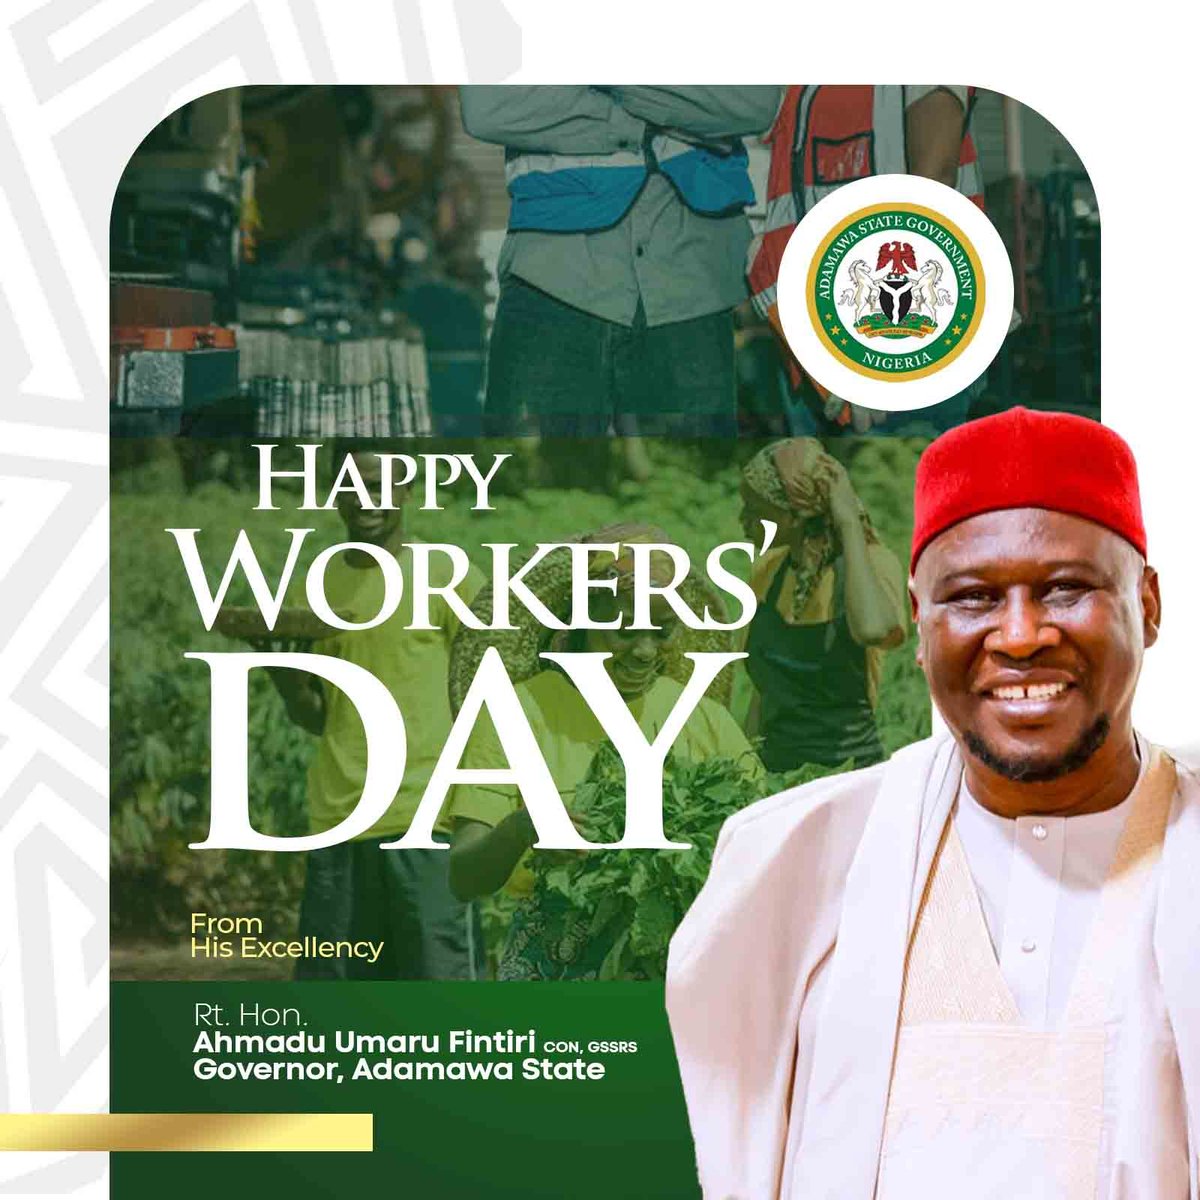 Happy Workers' Day, Adamawa State! Today, we celebrate our dedicated workforce. I'm proud to lead a state where workers' welfare is a top priority. Prompt payment of salaries, allowances, pensions, and measures to cushion subsidy removal effects are commitments to our valued…